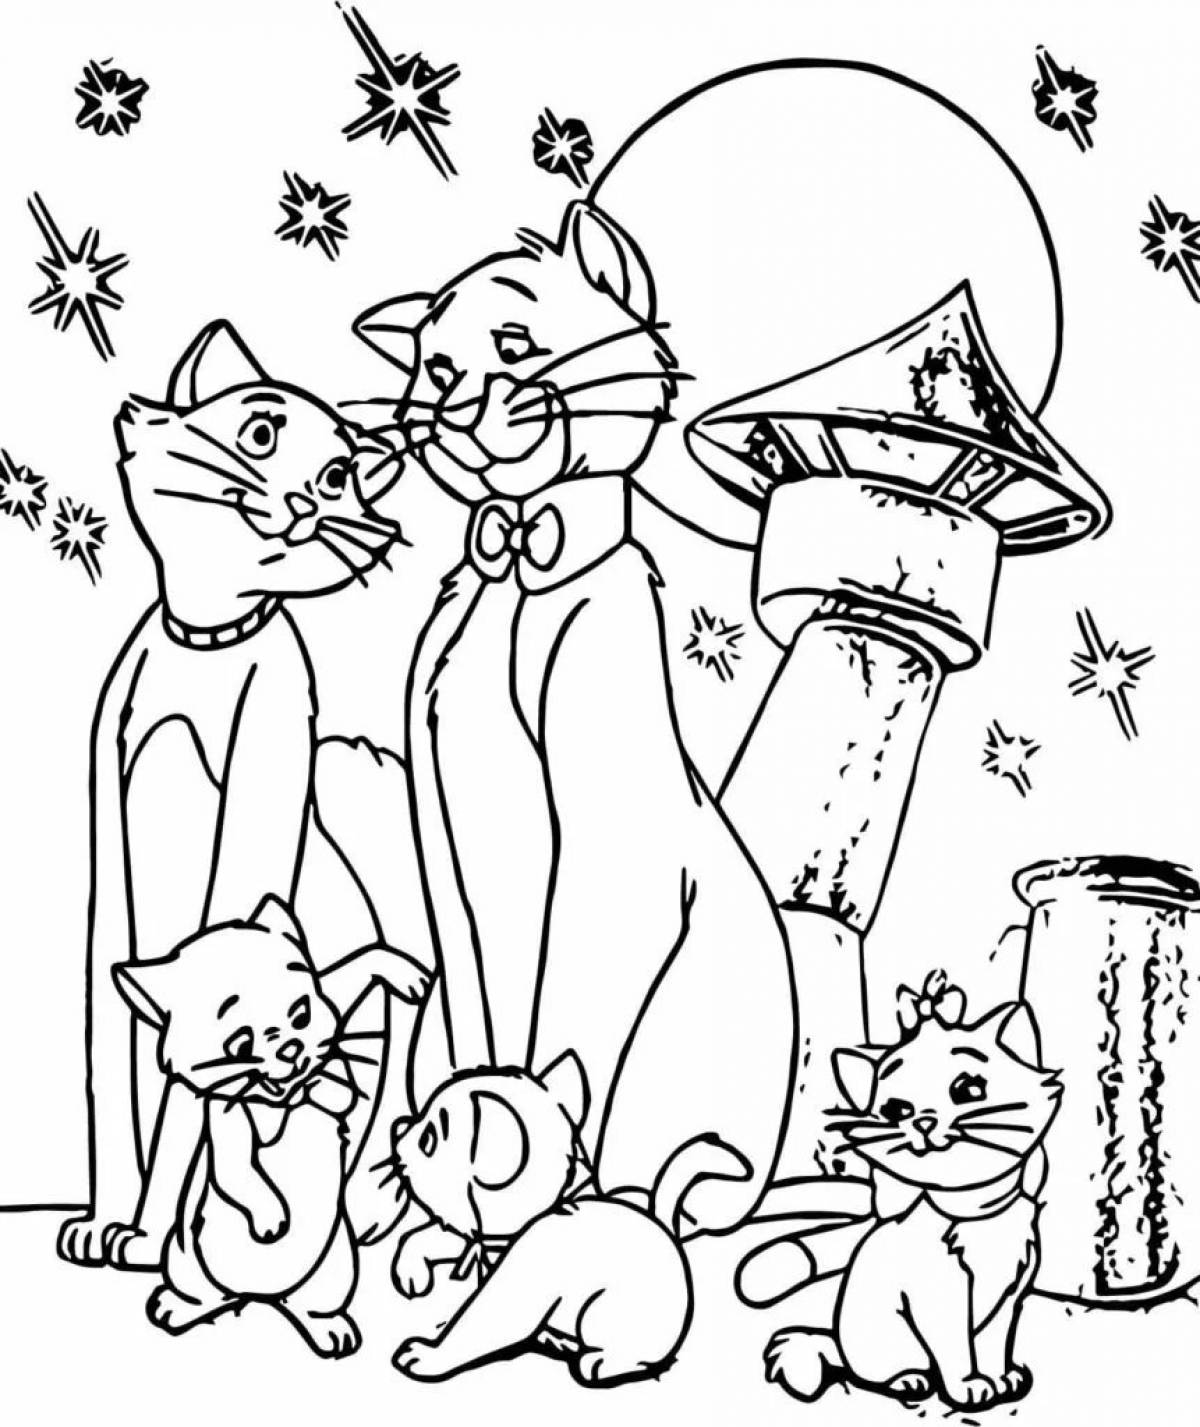 Coloring page affectionate cat family